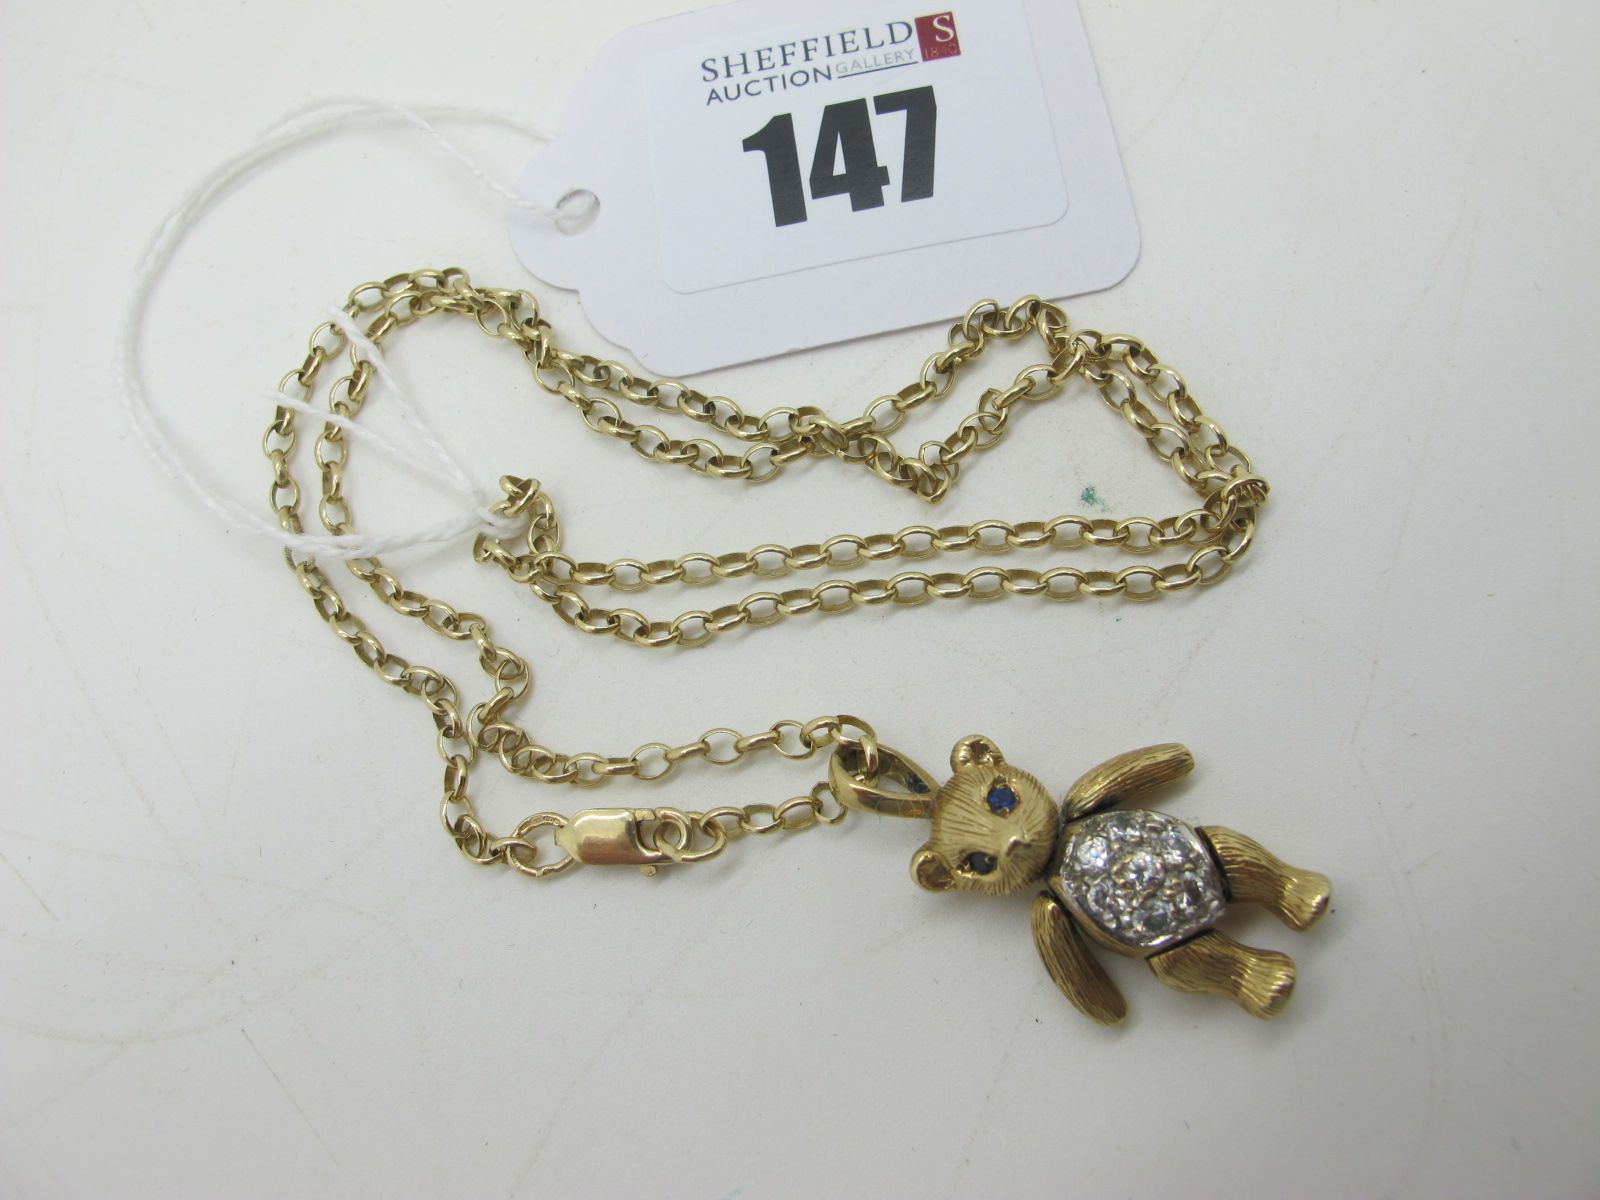 A 9ct Gold Articulated Teddy Bear Pendant, with inset highlights, on a 9ct gold belcher link chain.